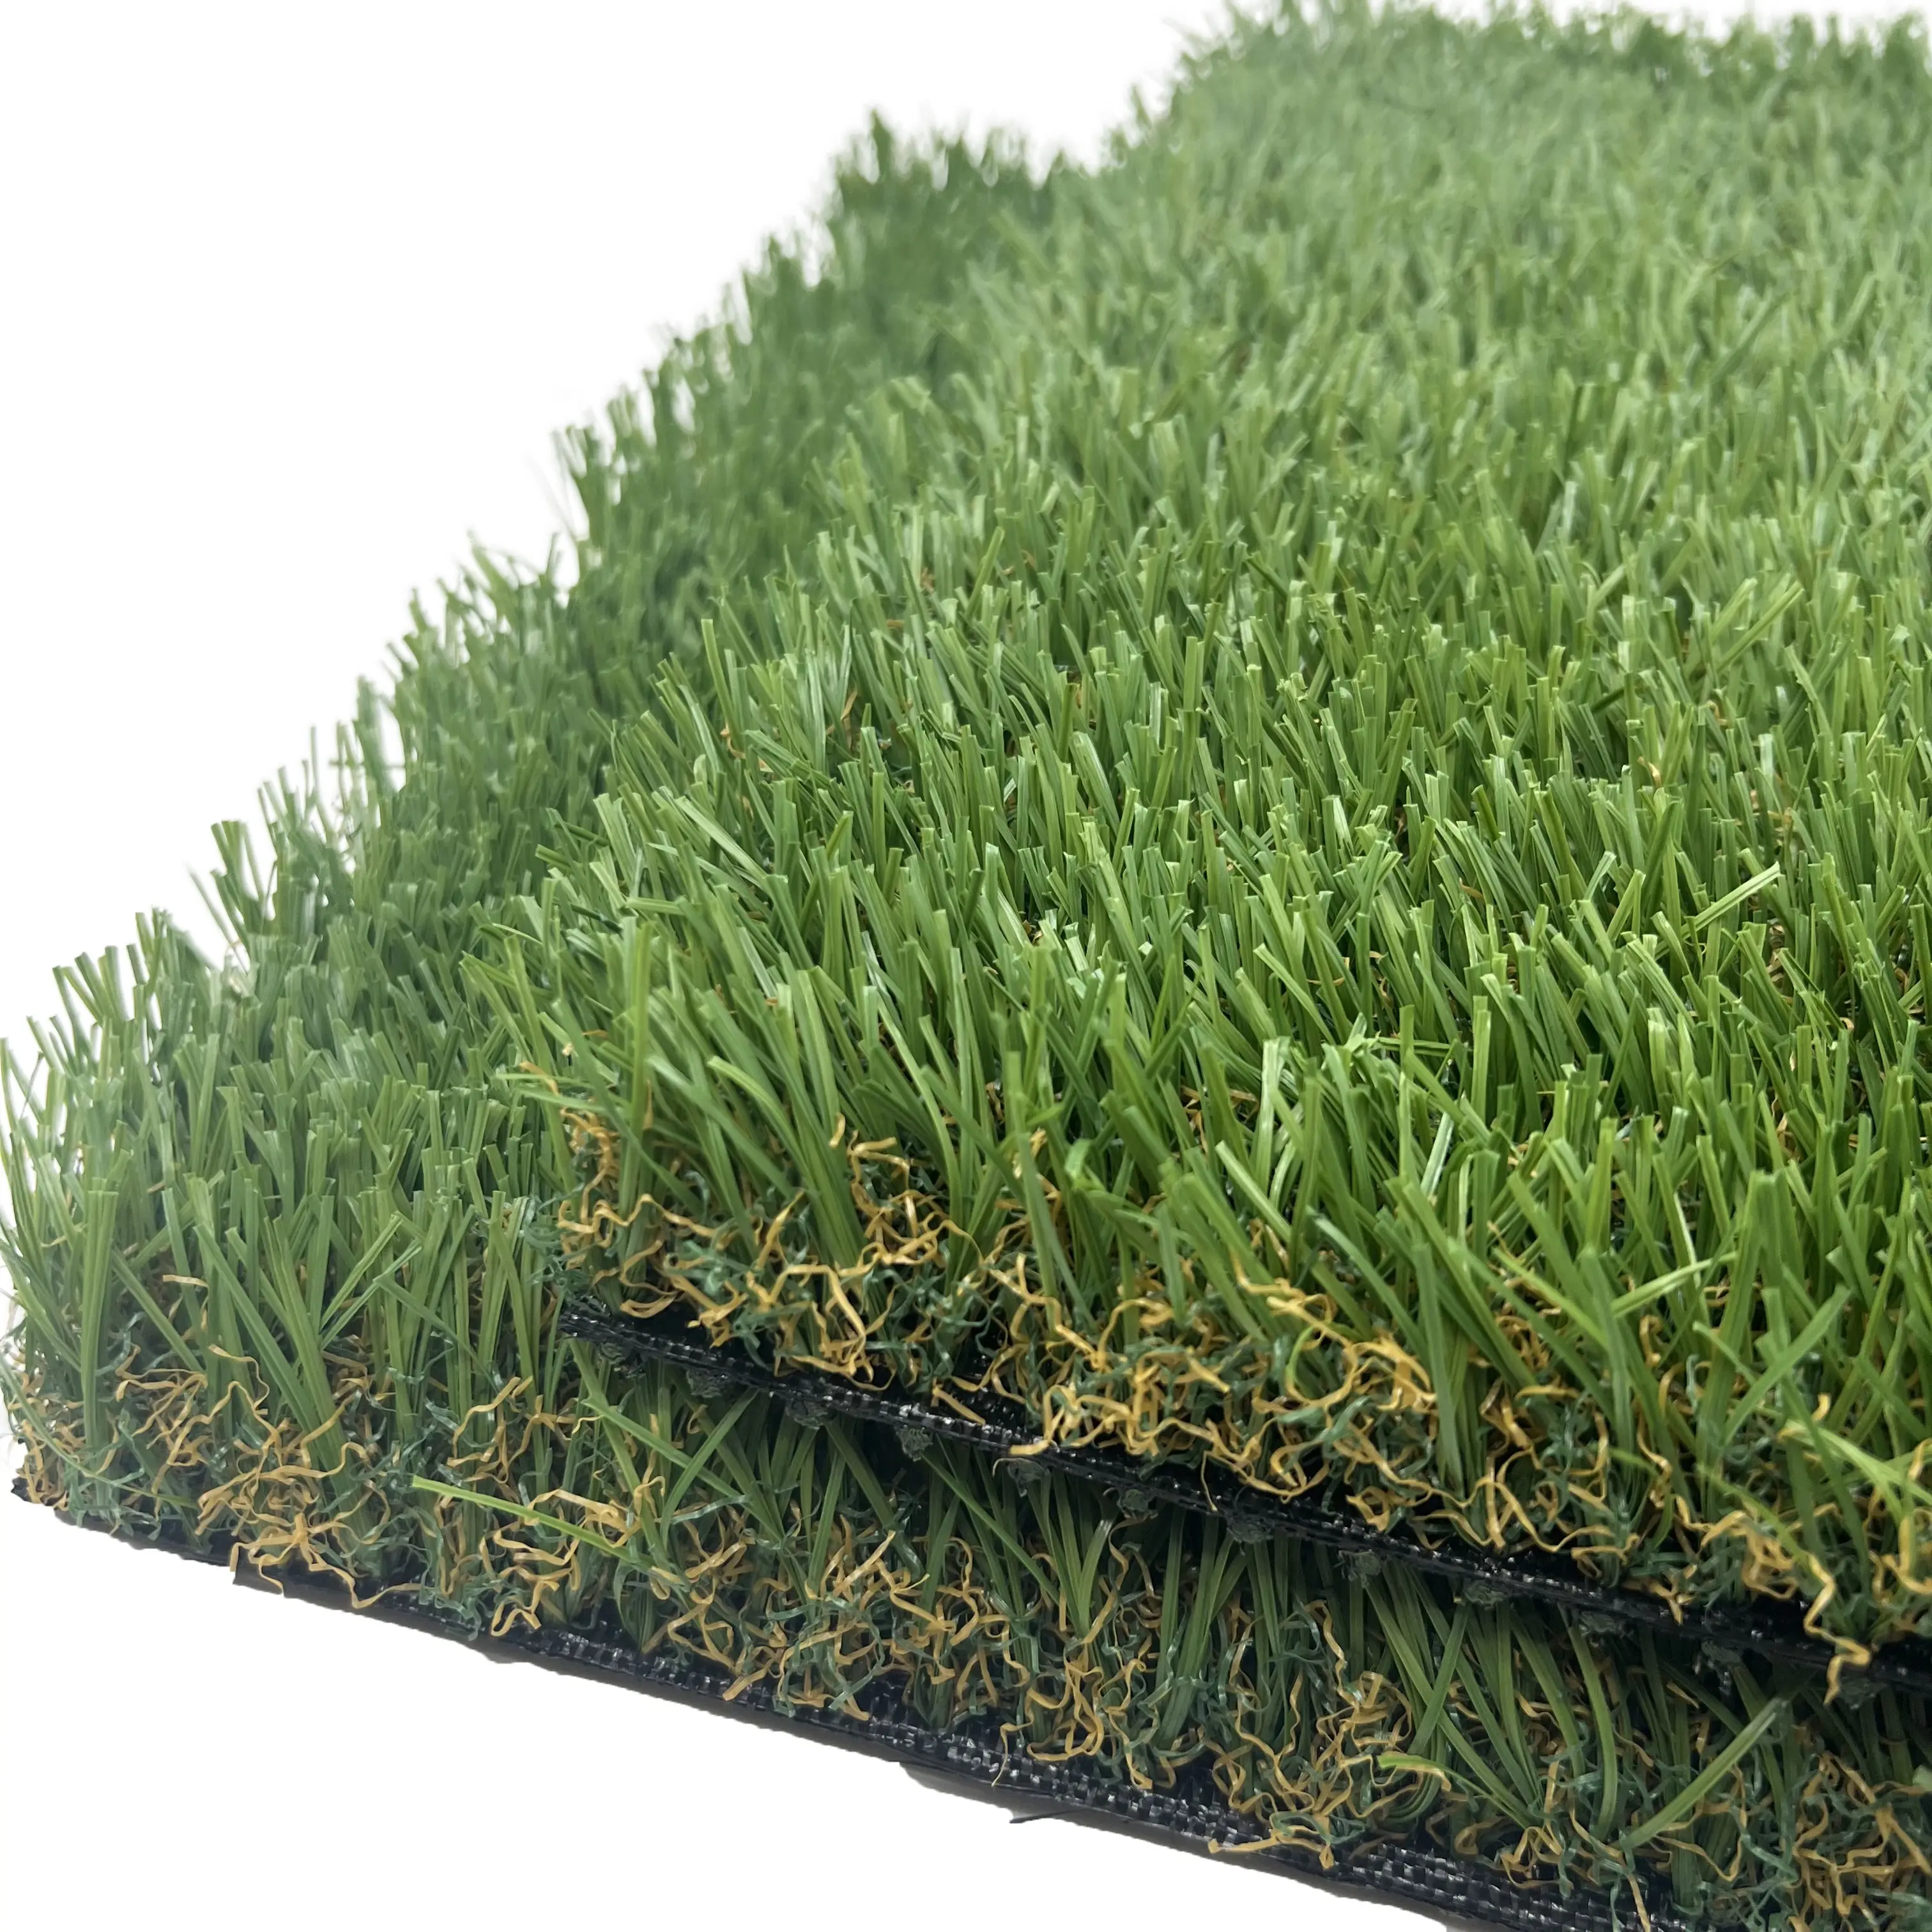 Hanwei Football landscape putting green grass synthetic turf matte artificial grass for North America, Europe